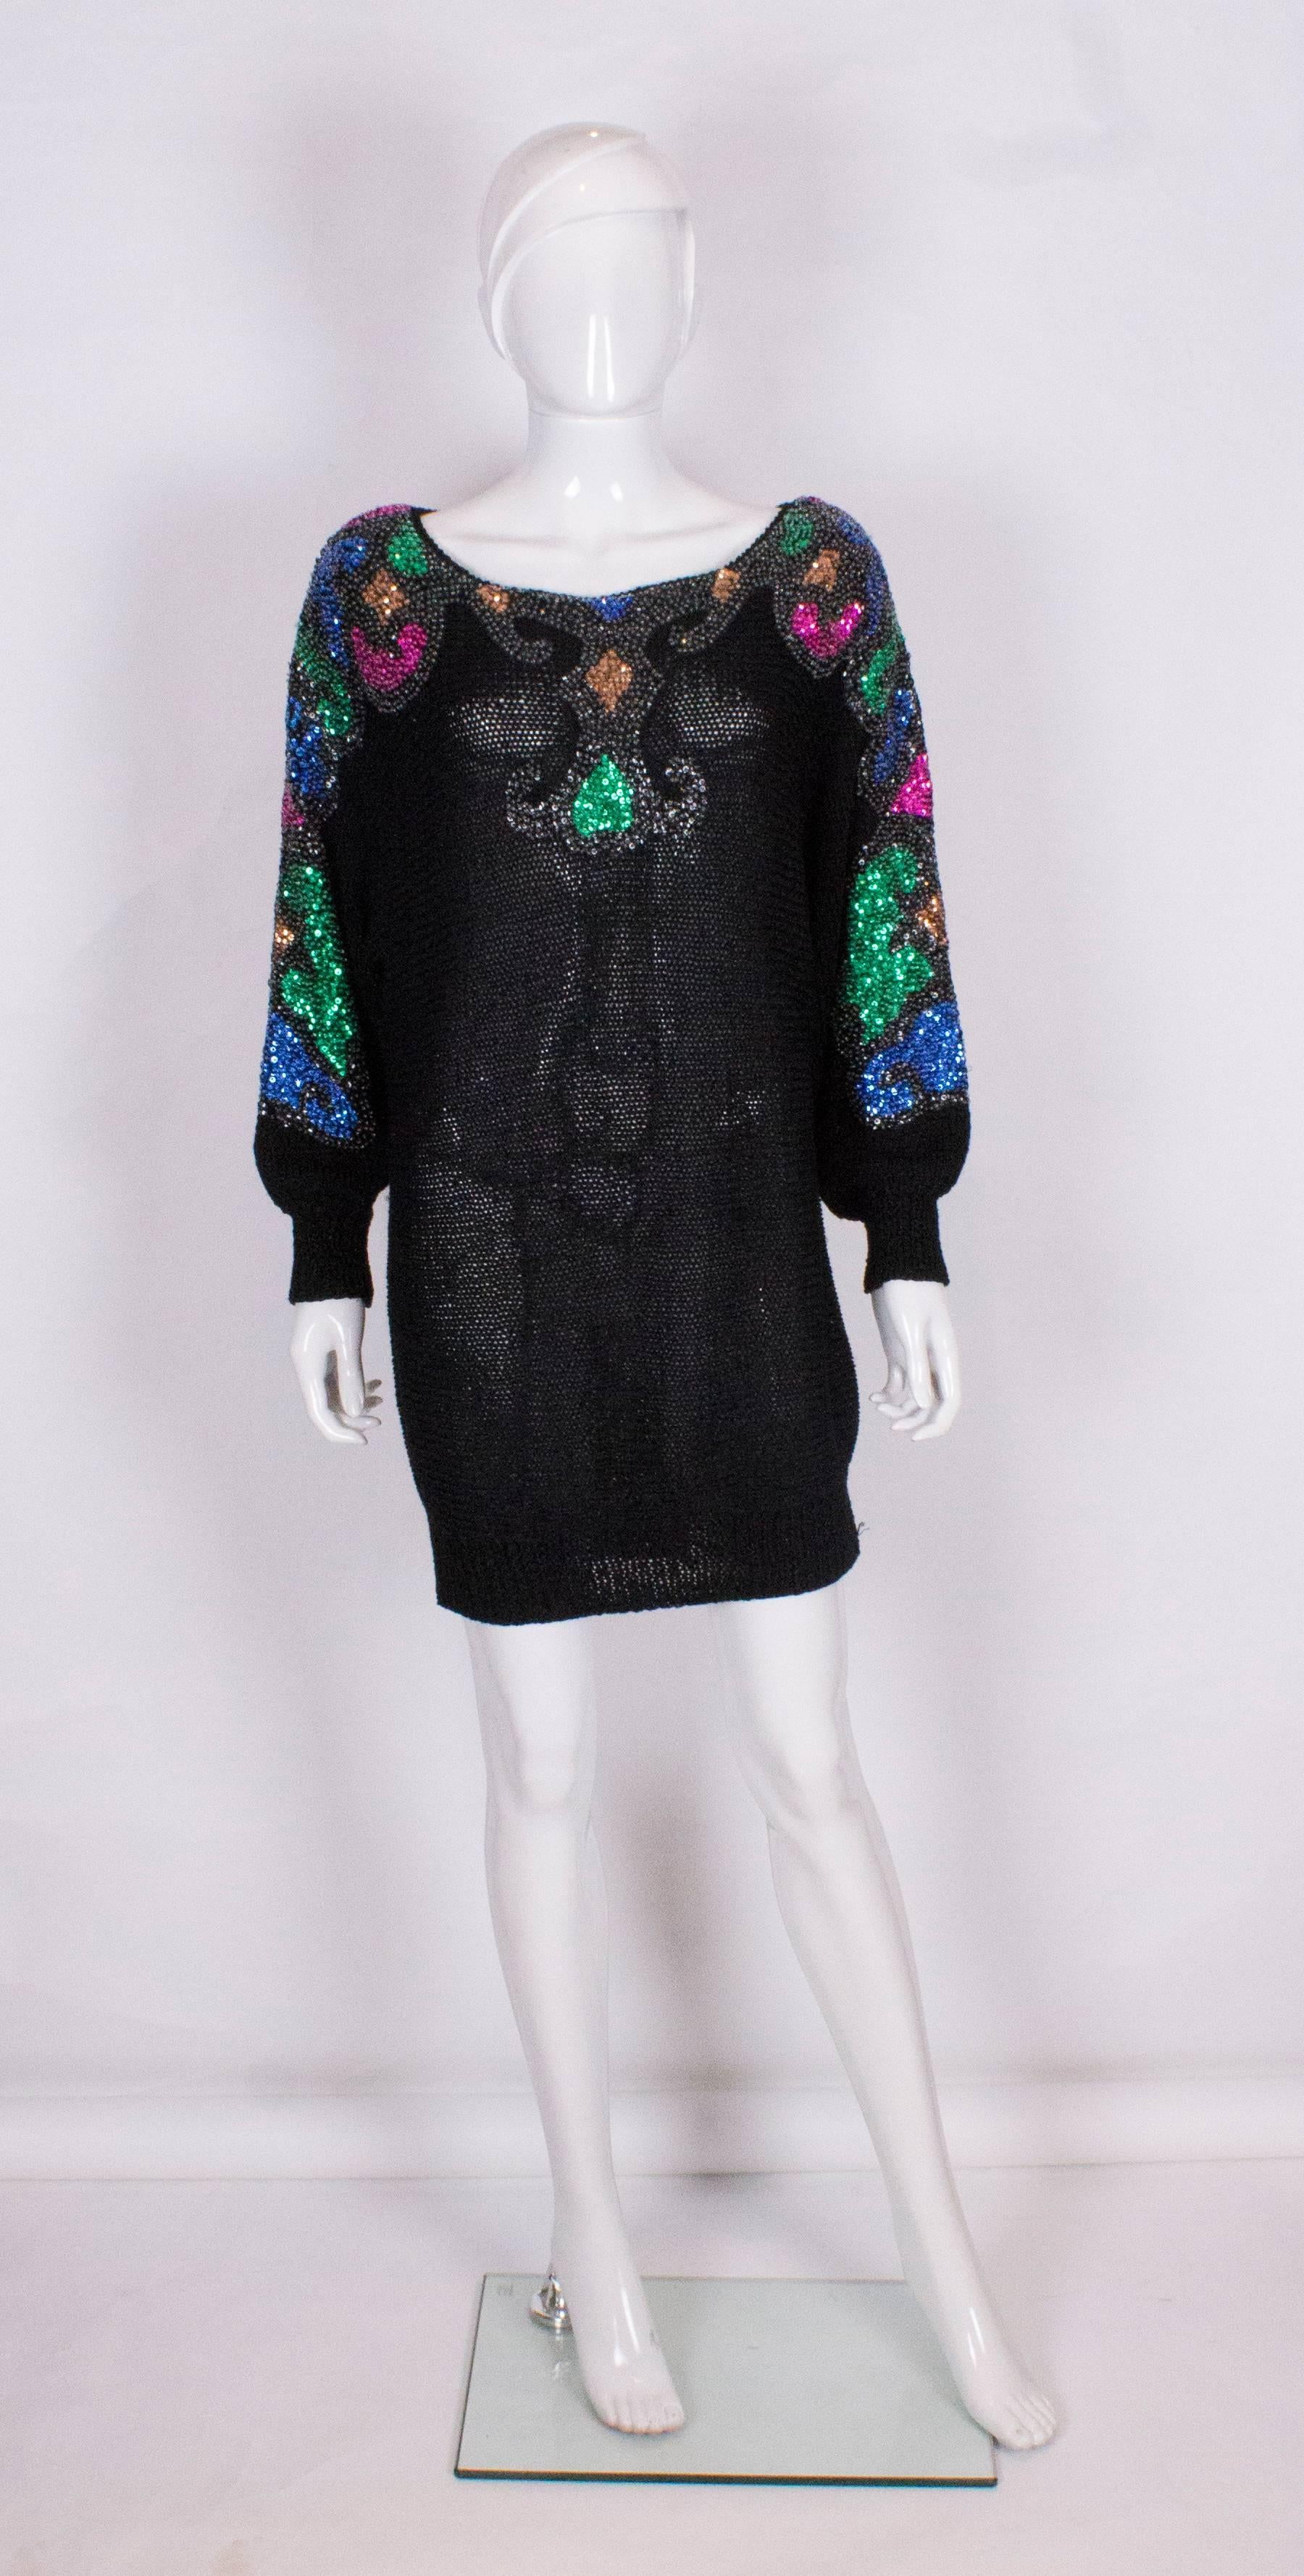 An easy to wear evening sweater by Mannell. Ideal to wear wear with leggings or an evening skirt. The jumper has a scoop neck, batwing sleeves, and embellishment  on the arms, front and back.It has the original shoulder pads.
It should be worn 